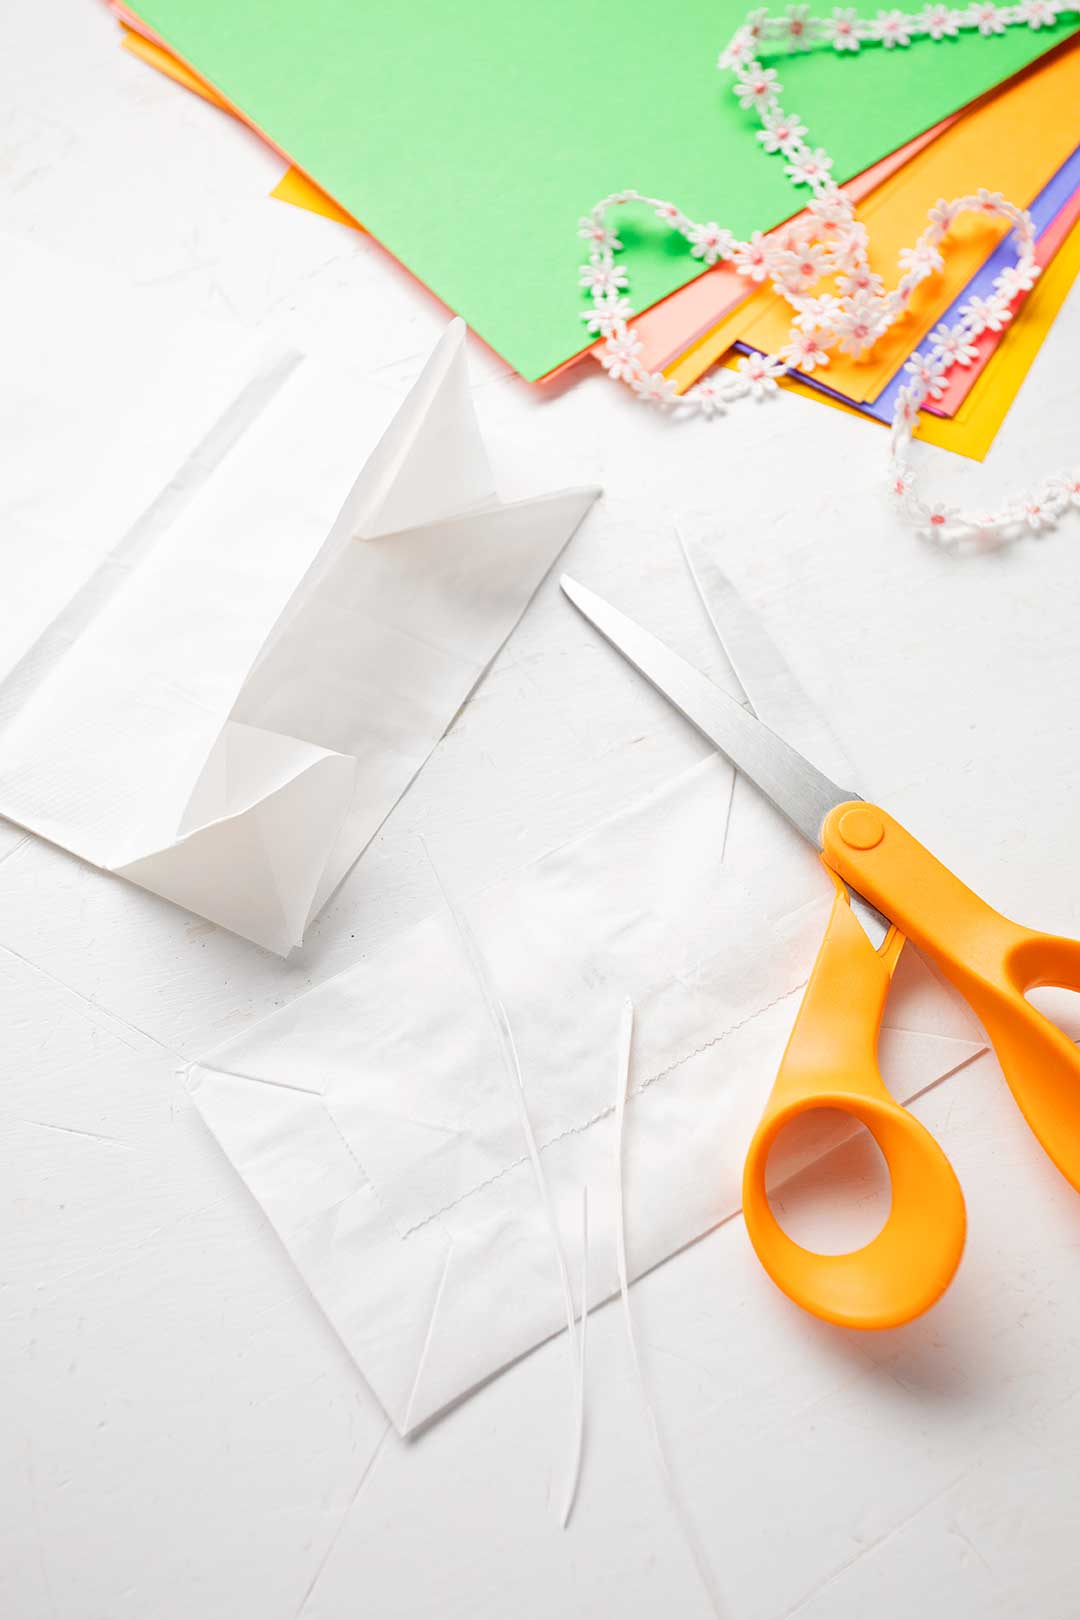 Scissors and colorful paper rest on a white background. The image shows the bottom of a white paper bag cut off.